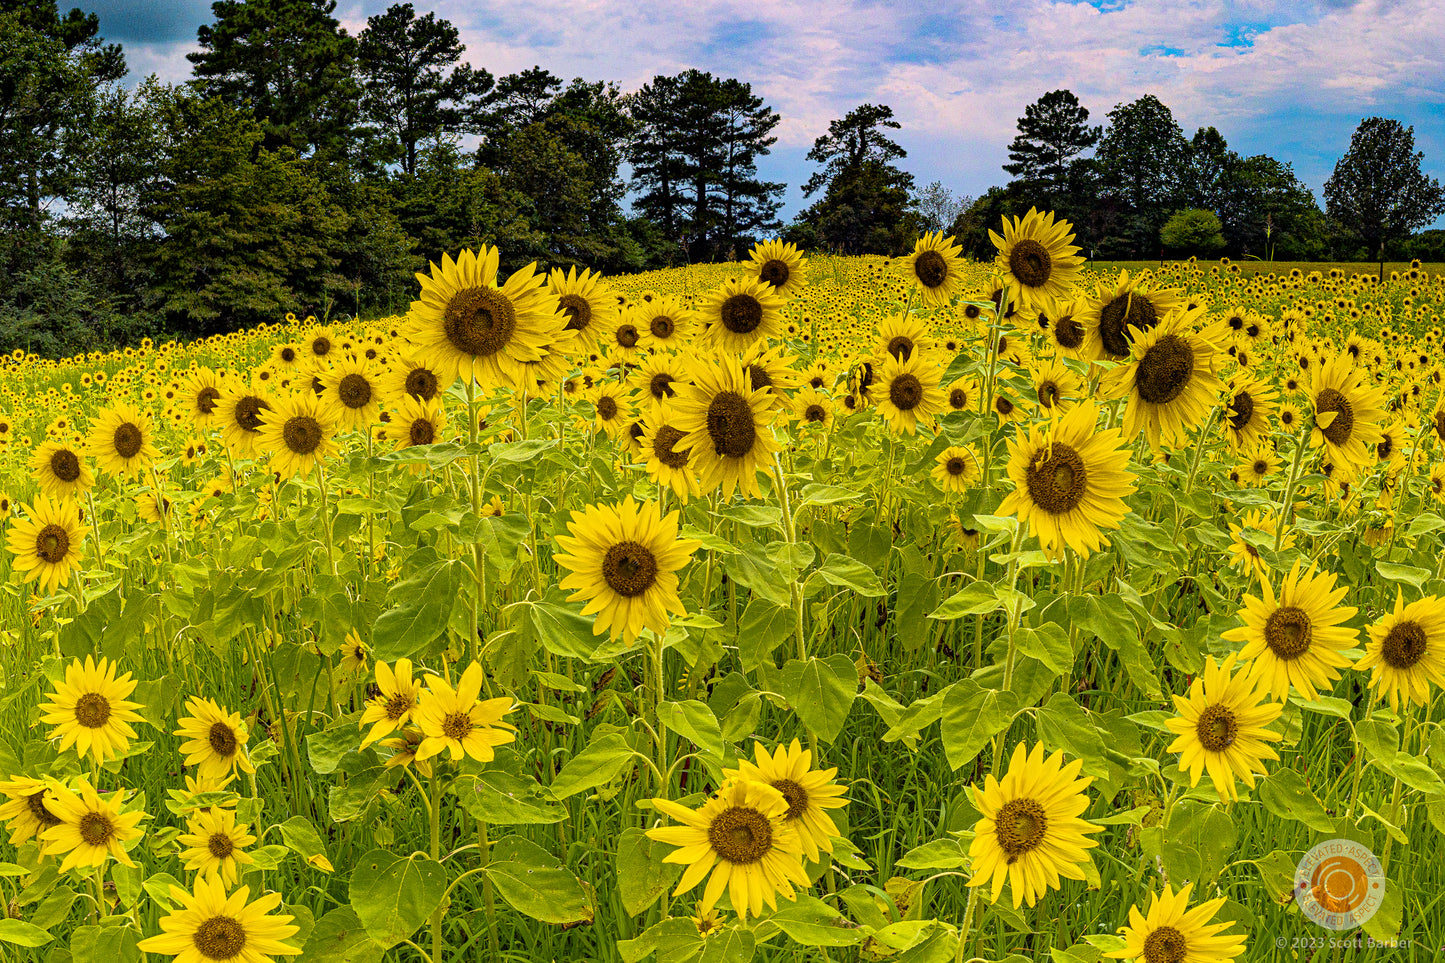 March of the Sunflowers